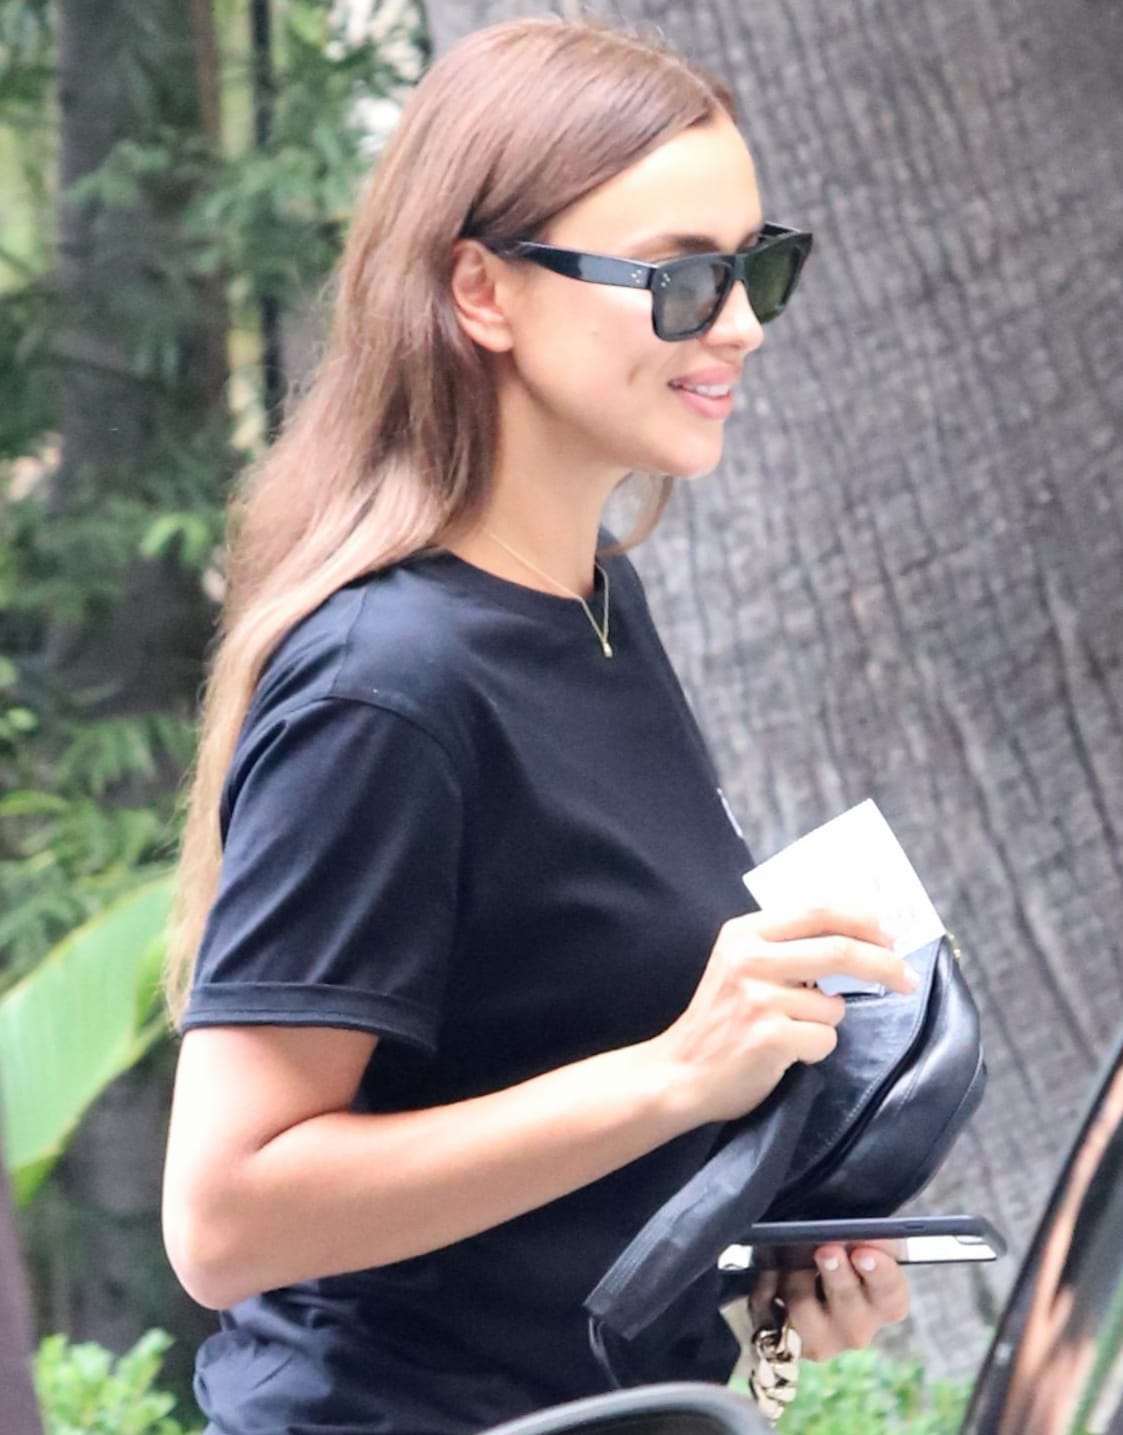 Irina Shayk keeps things simple with barely-there makeup and hides her eyes behind a pair of Celine sunnies